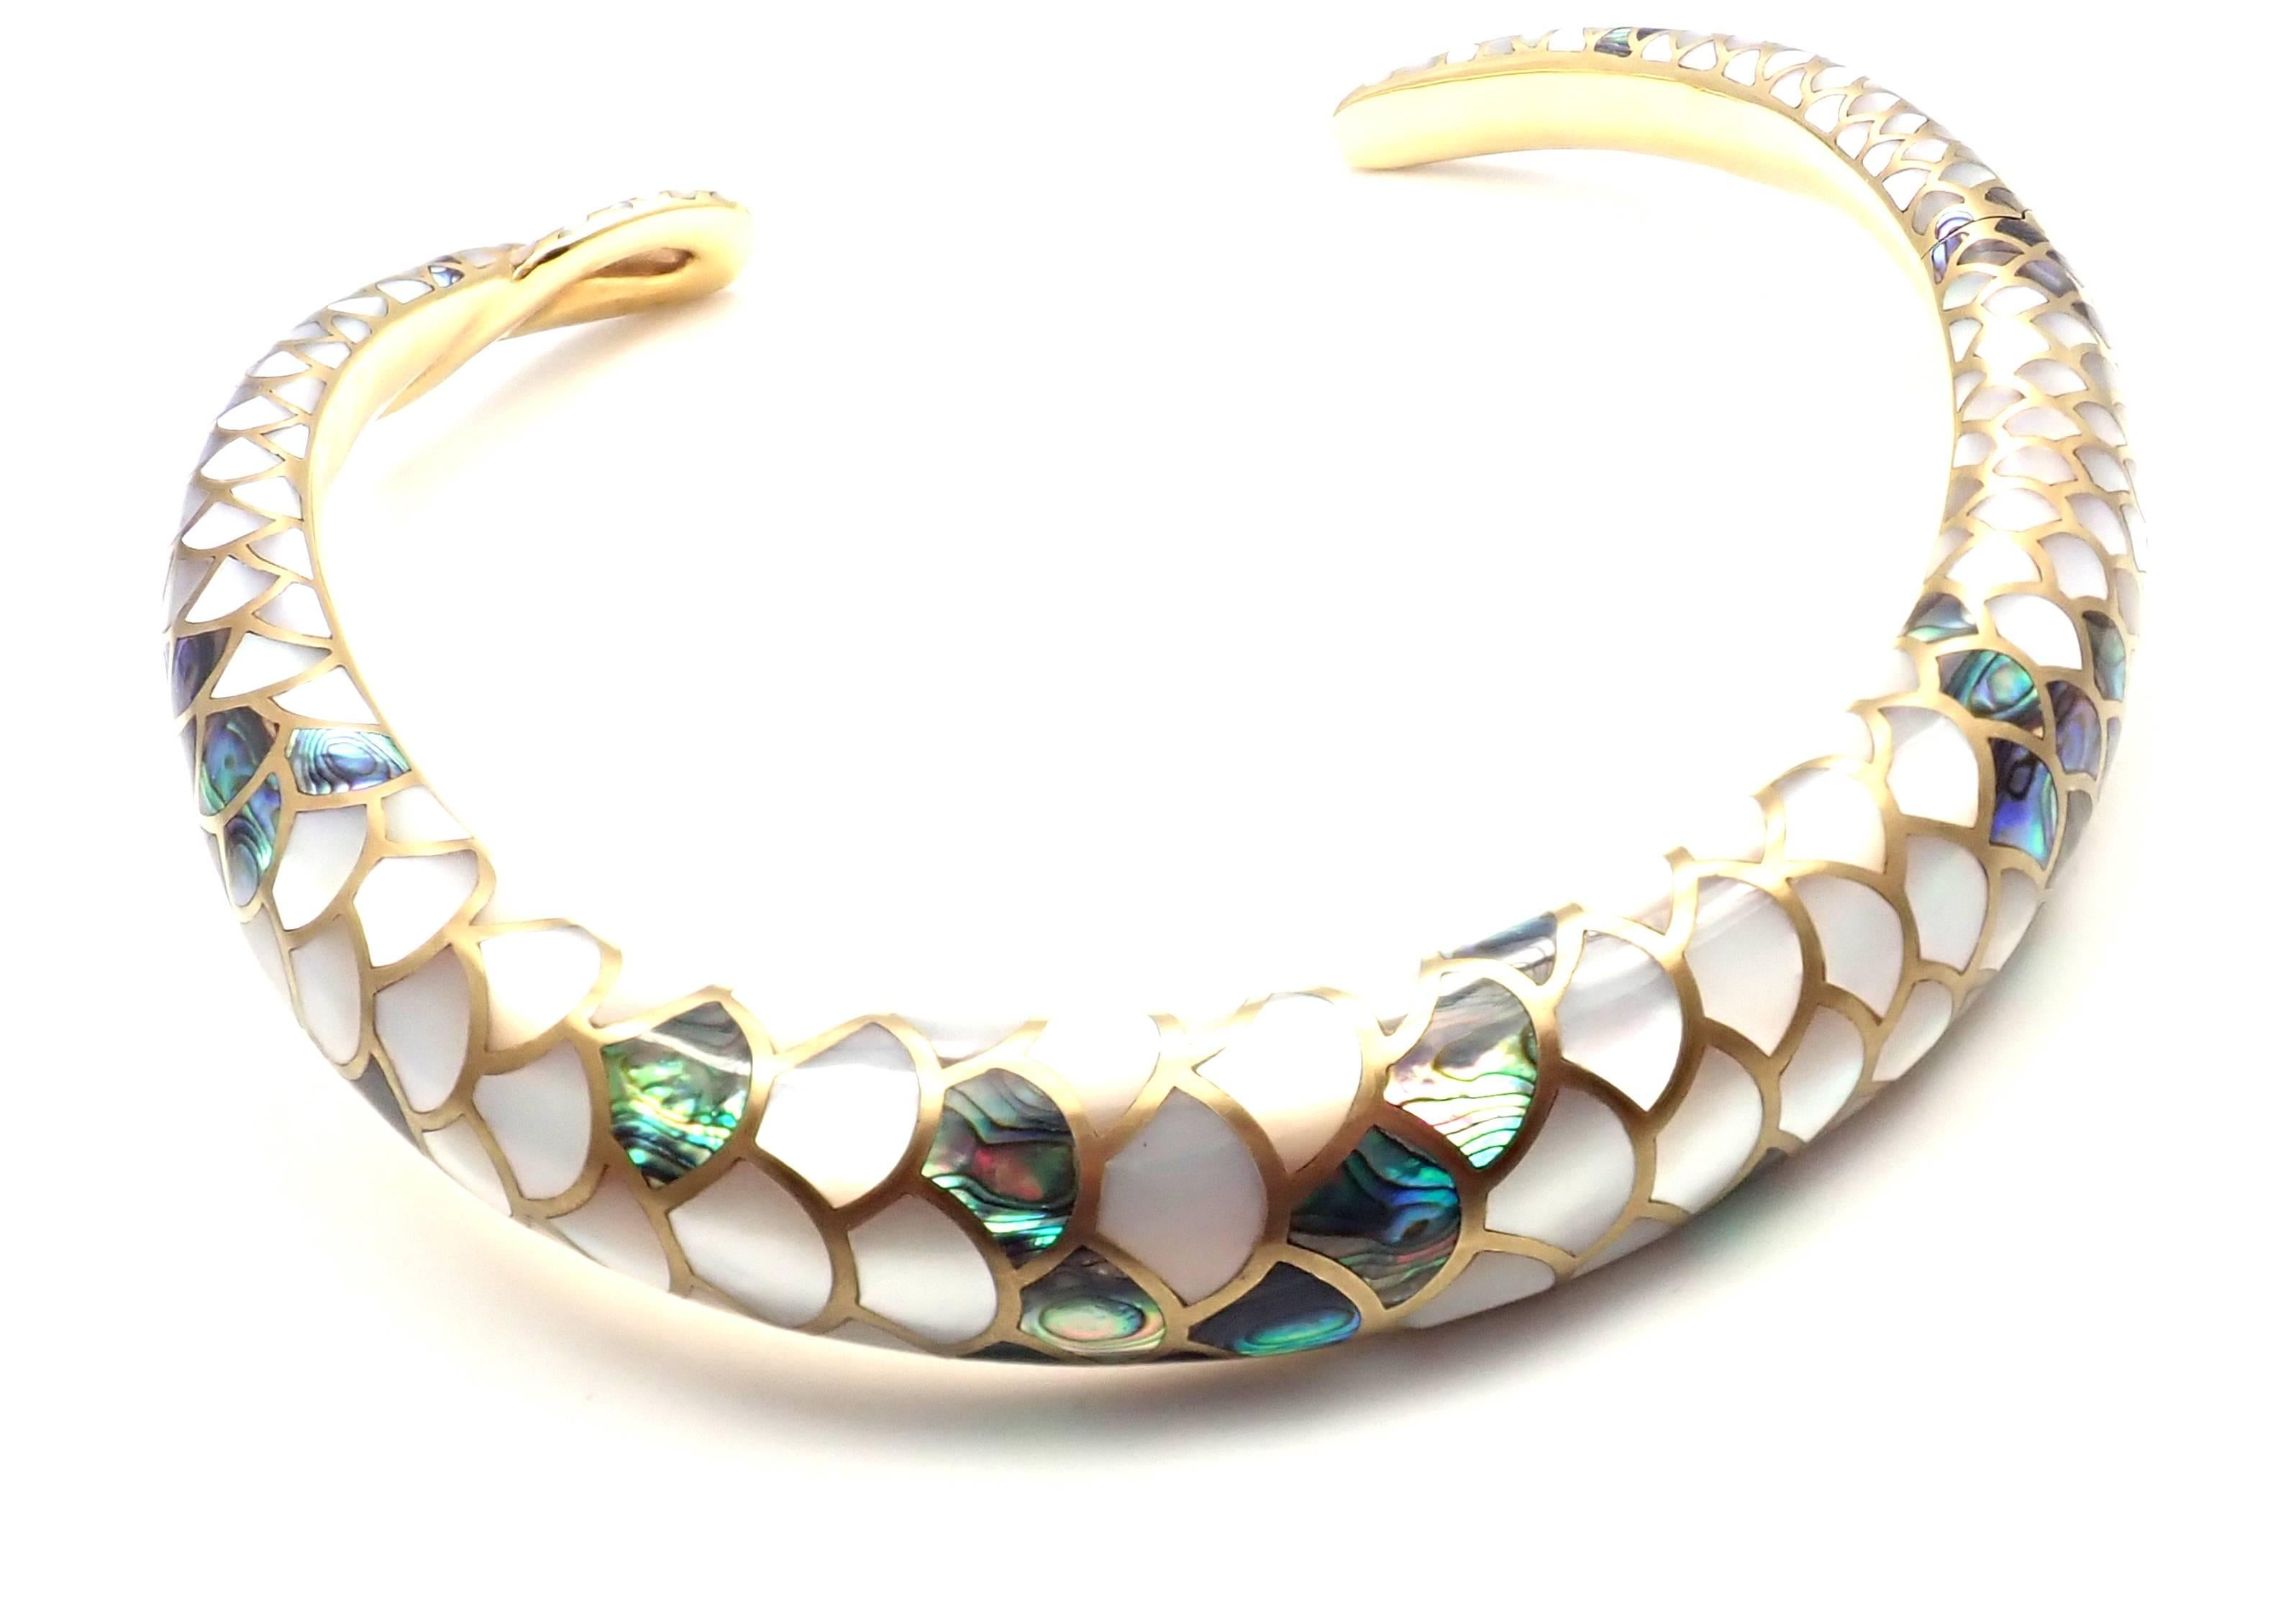 18k Yellow Gold Inlaid White And Green Mother Of Pearl Snakeskin Collar Necklace 
by Angela Cummings. 
With Inlaid white and green mother of pearl to resemble snakeskin.
This necklace was featured in Angels Cummings booklet.
Details: 
Weight: 131.2